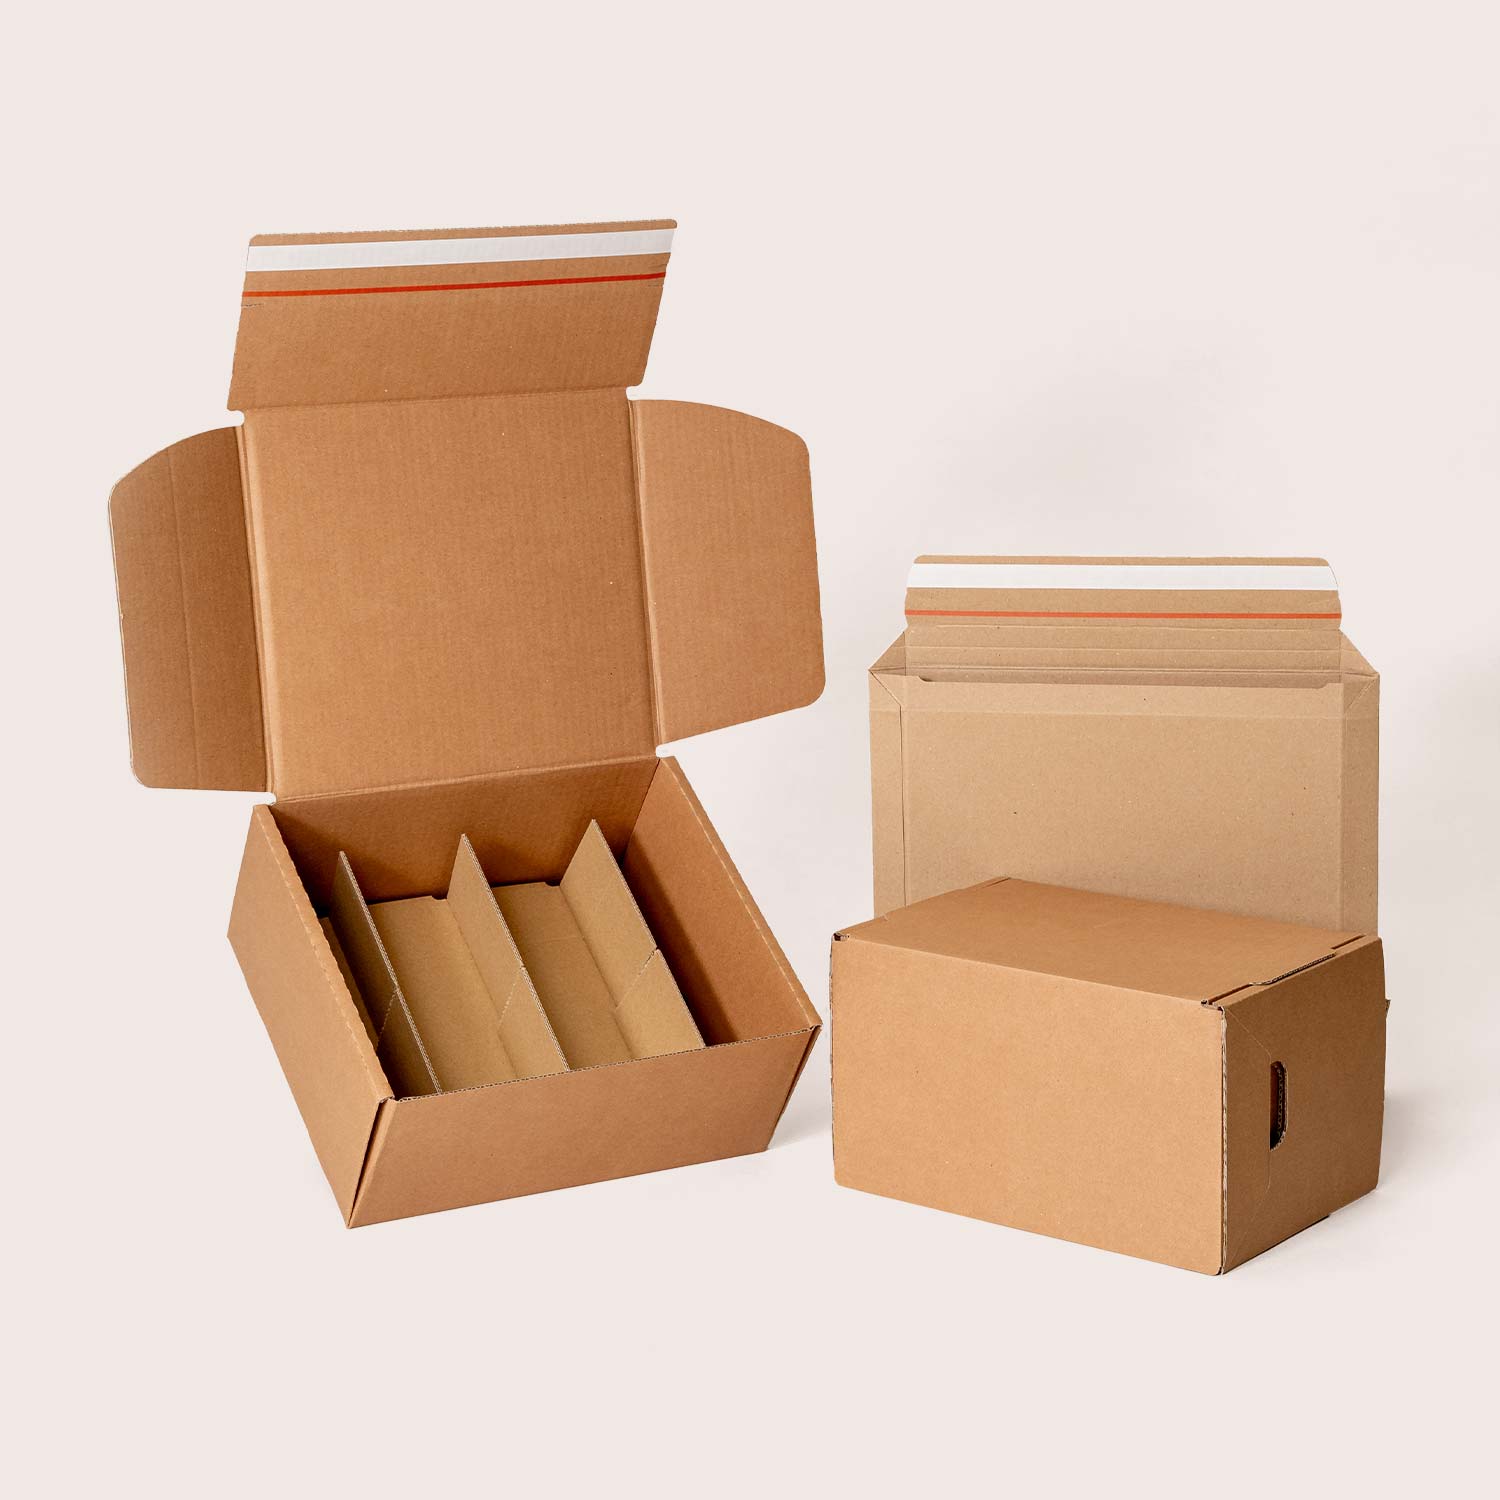 Buy shipping boxes